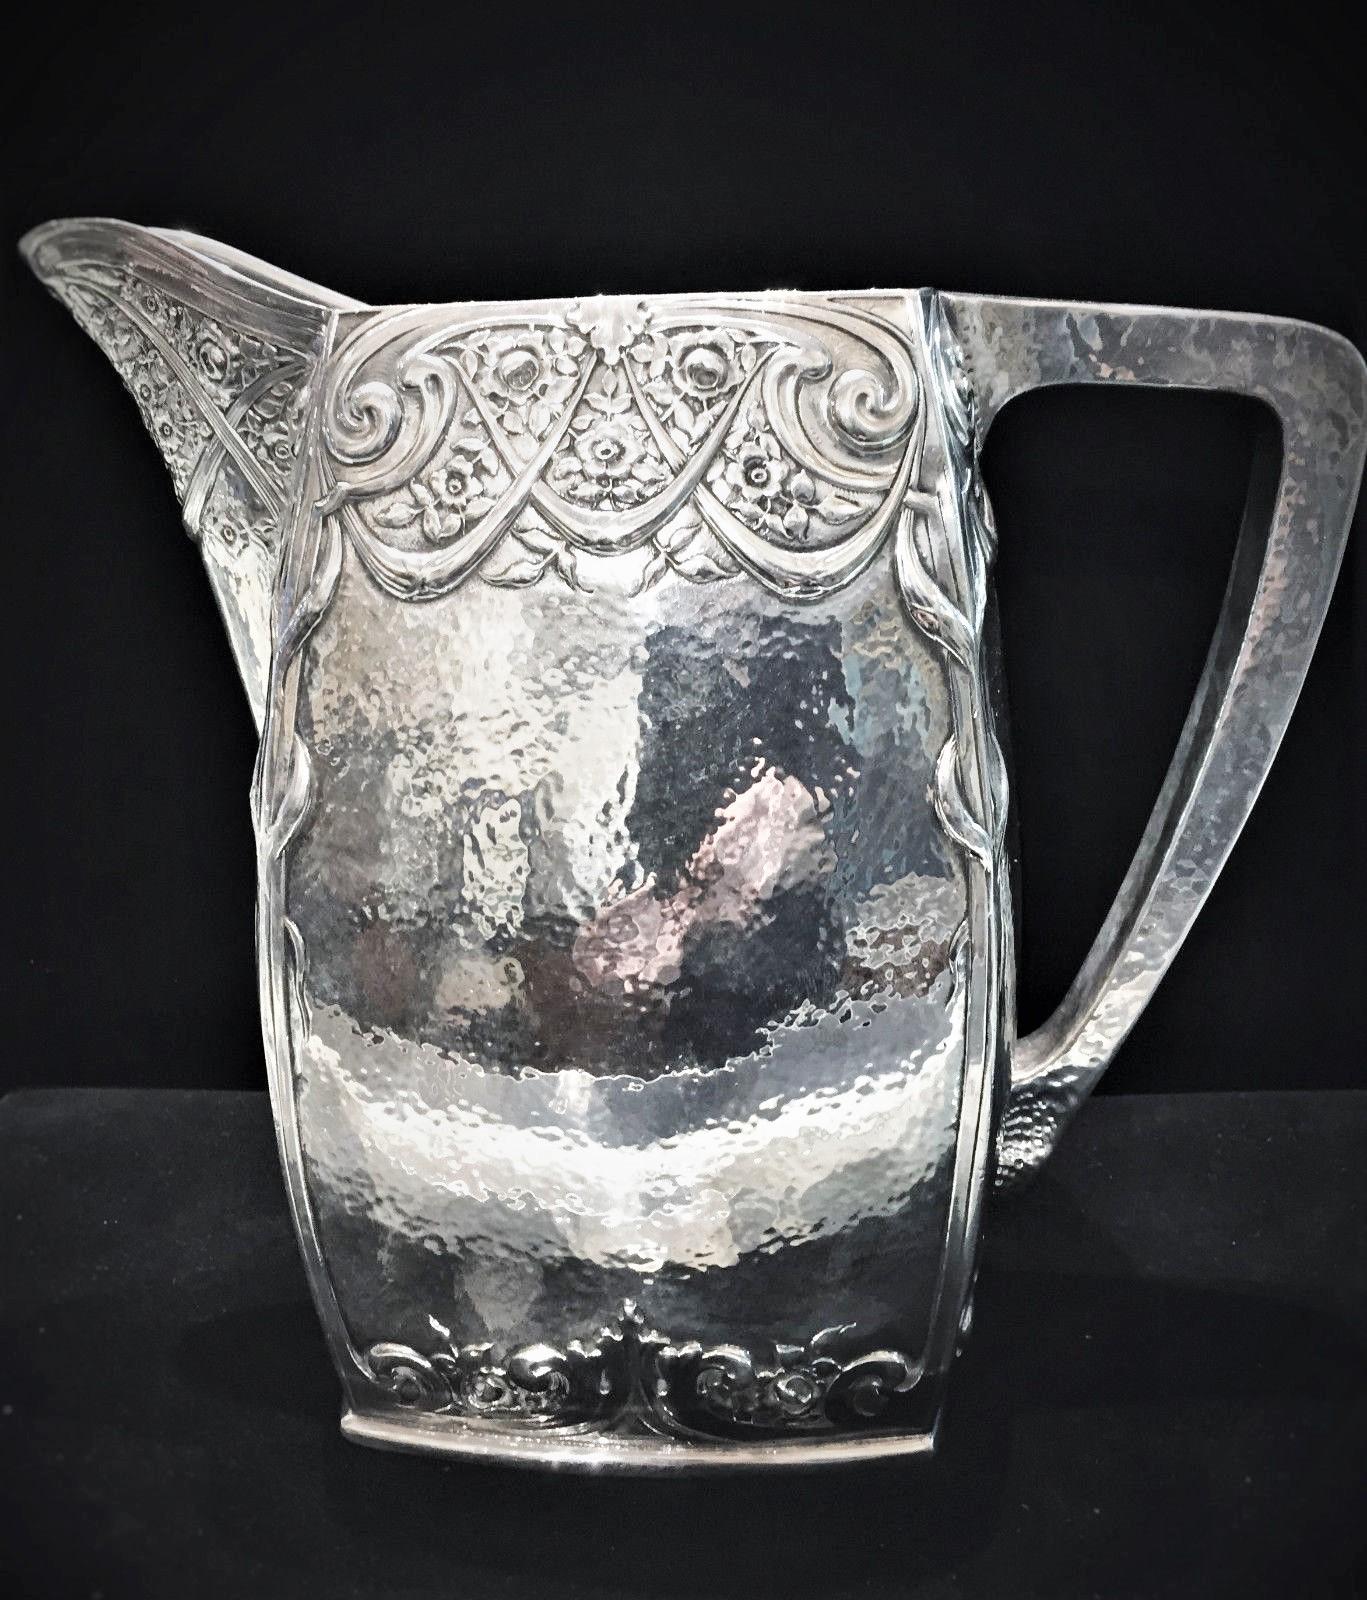 Probably Dutch. Lavishly designed in the style of Arts & Crafts / Art Nouveau, this outstanding handmade, hammered silver plated water pitcher was obviously crafted by a highly skilled silversmith. The hallmark on the bottom looks like a mill,